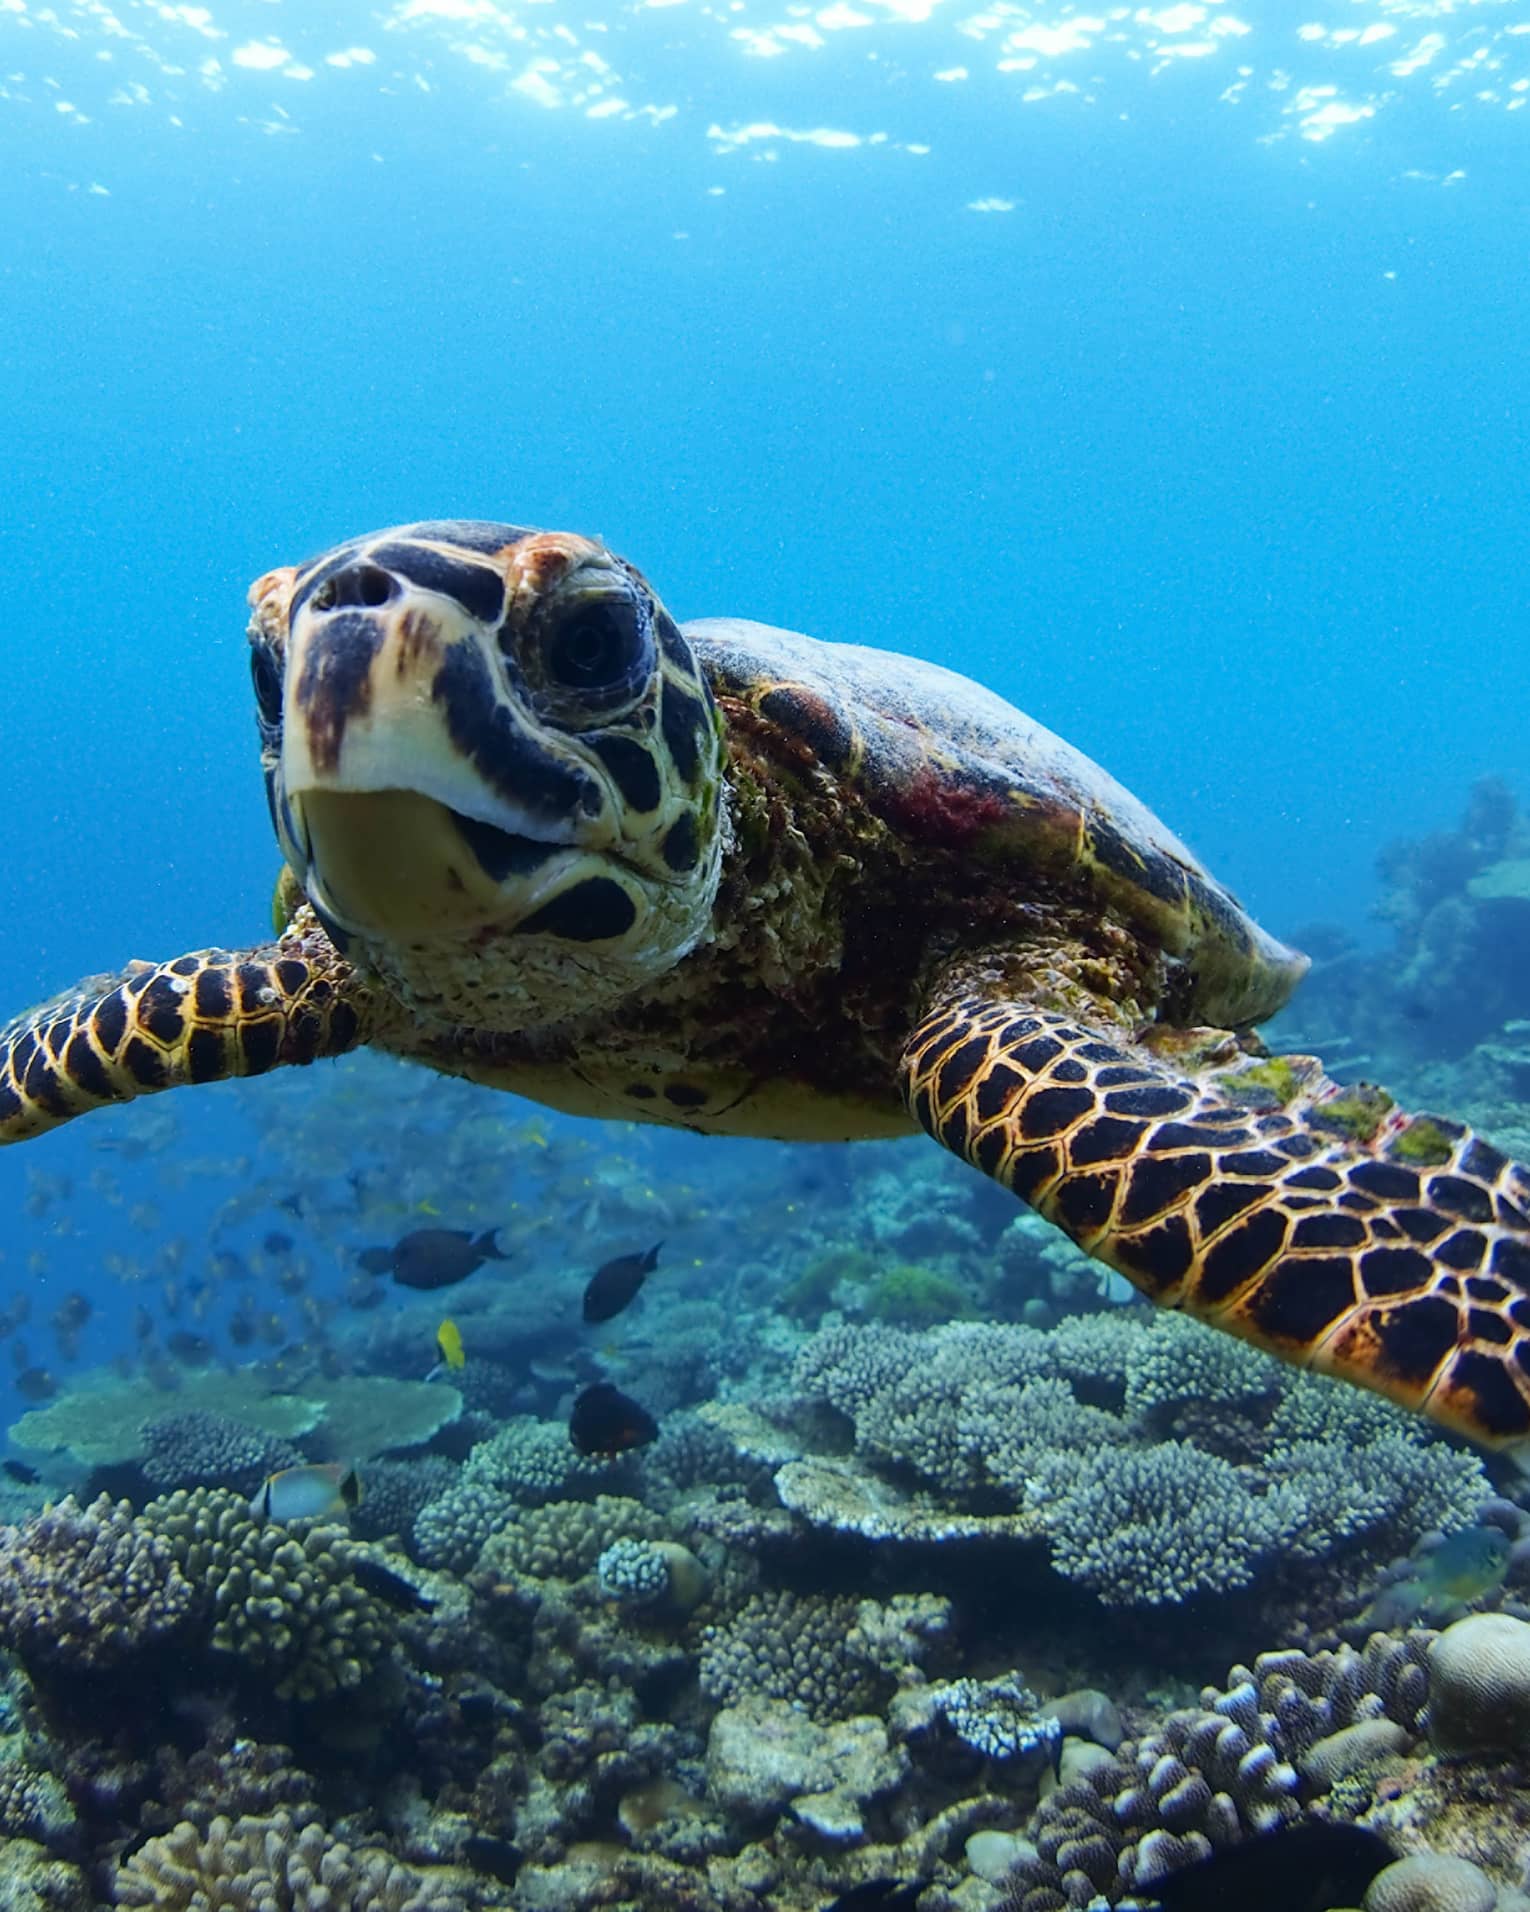 Close-up view of turtle with beak-like mouth and mottled front flippers, swimming above coral, fish below and in background.